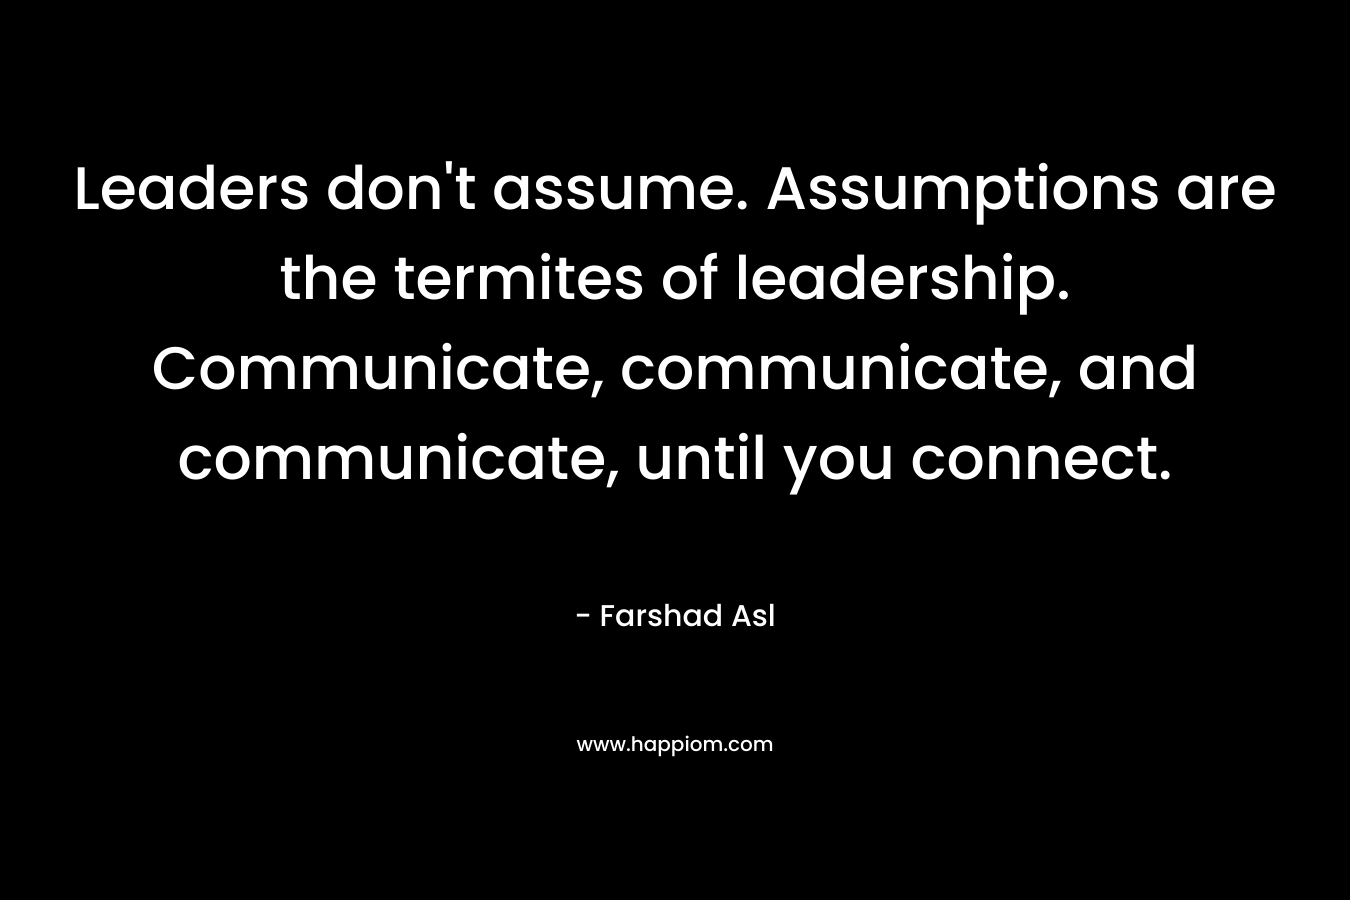 Leaders don't assume. Assumptions are the termites of leadership. Communicate, communicate, and communicate, until you connect.